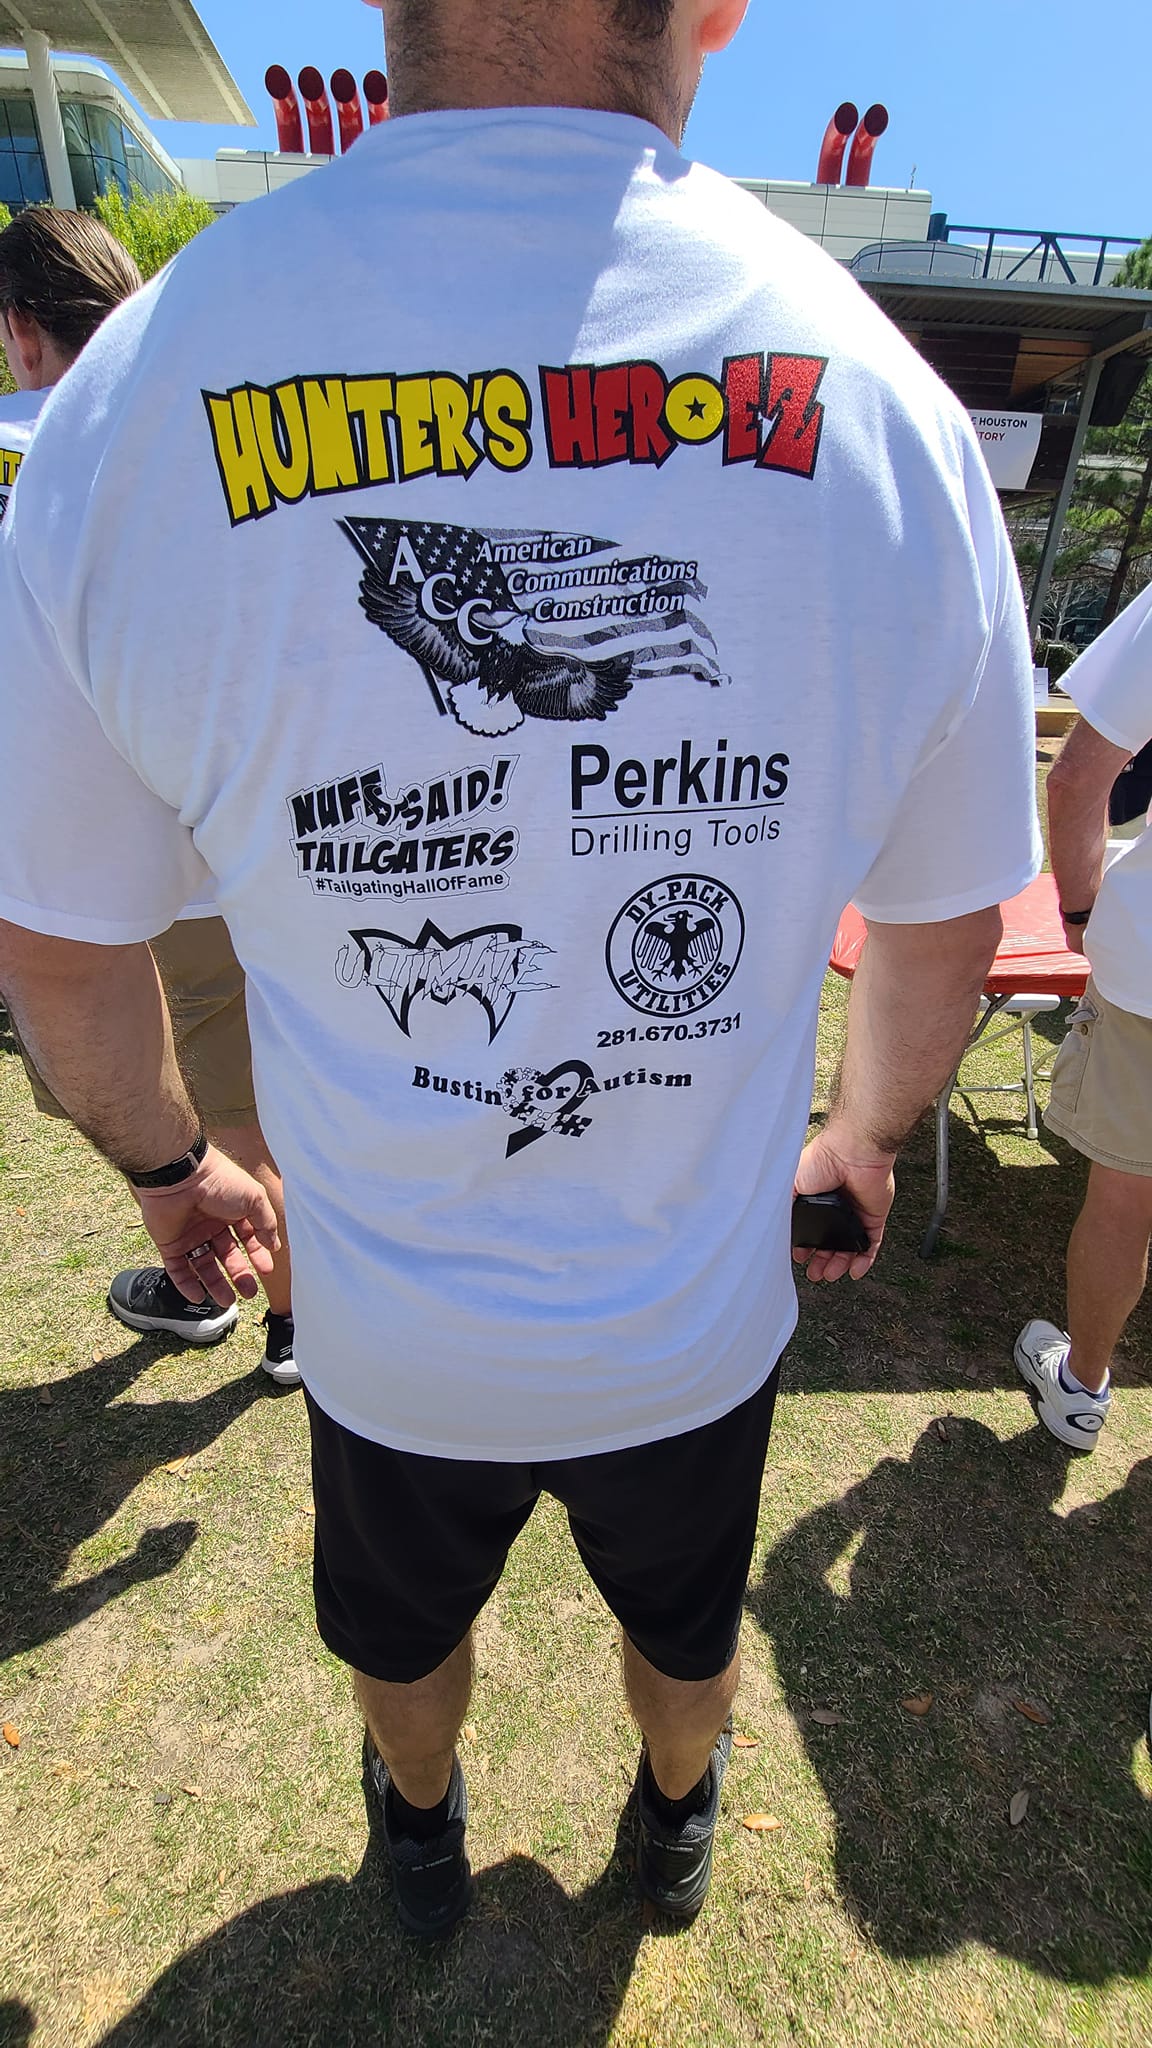 Bustin' For Austism is a Proud Sponsor of Hunter's Heroes - Benefiting The Marfan Foundation Walk For Victory - March 26, 2022